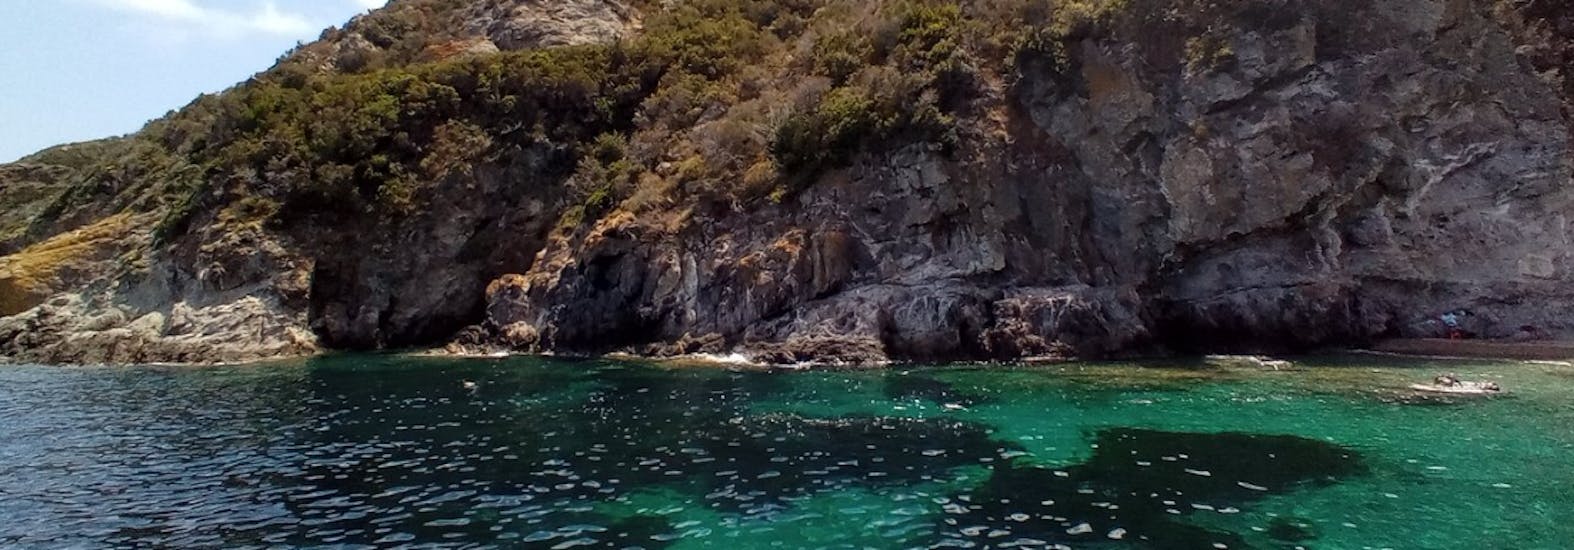 Cliffs that you can see during our boat Trip along the Southeast Coast of Elba with Motobarca Mickey Mouse Elba.